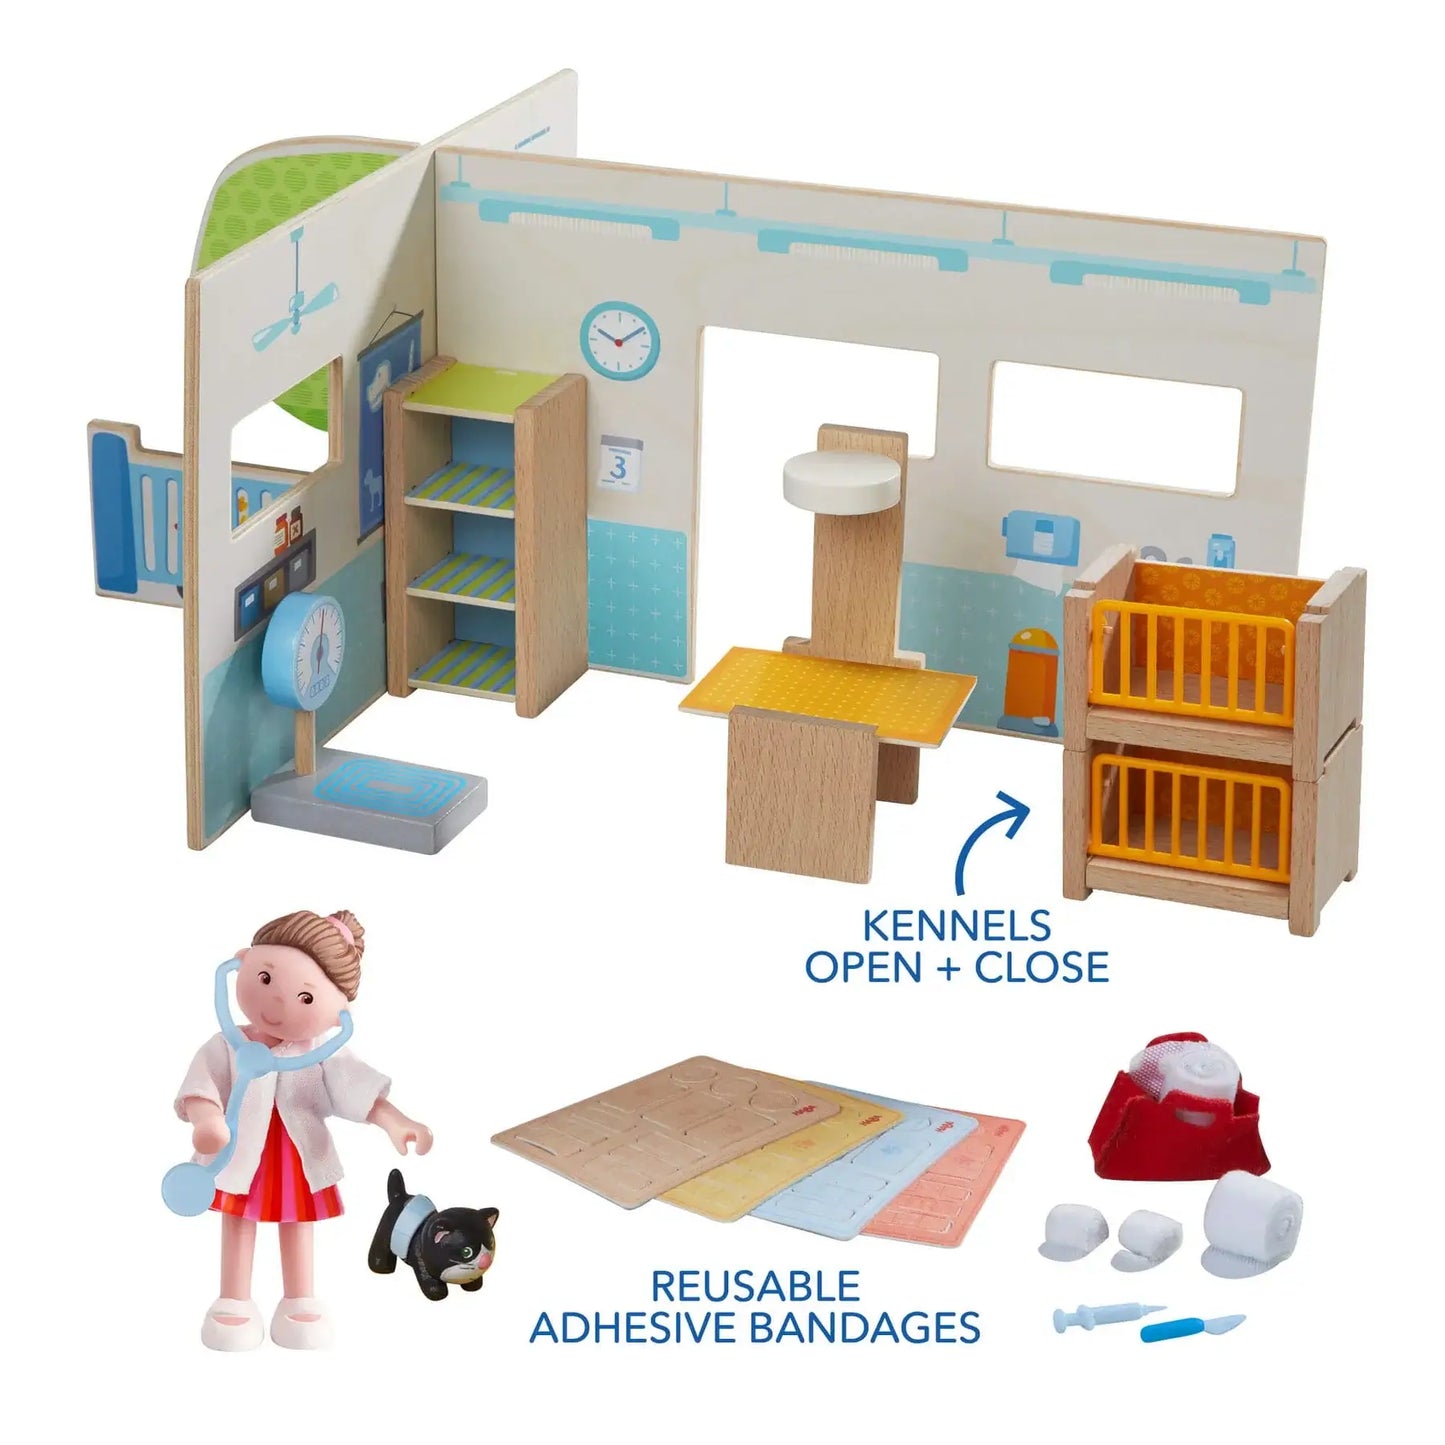 Little Friends Vet Clinic Play Set with Rebecca Doll and Vet